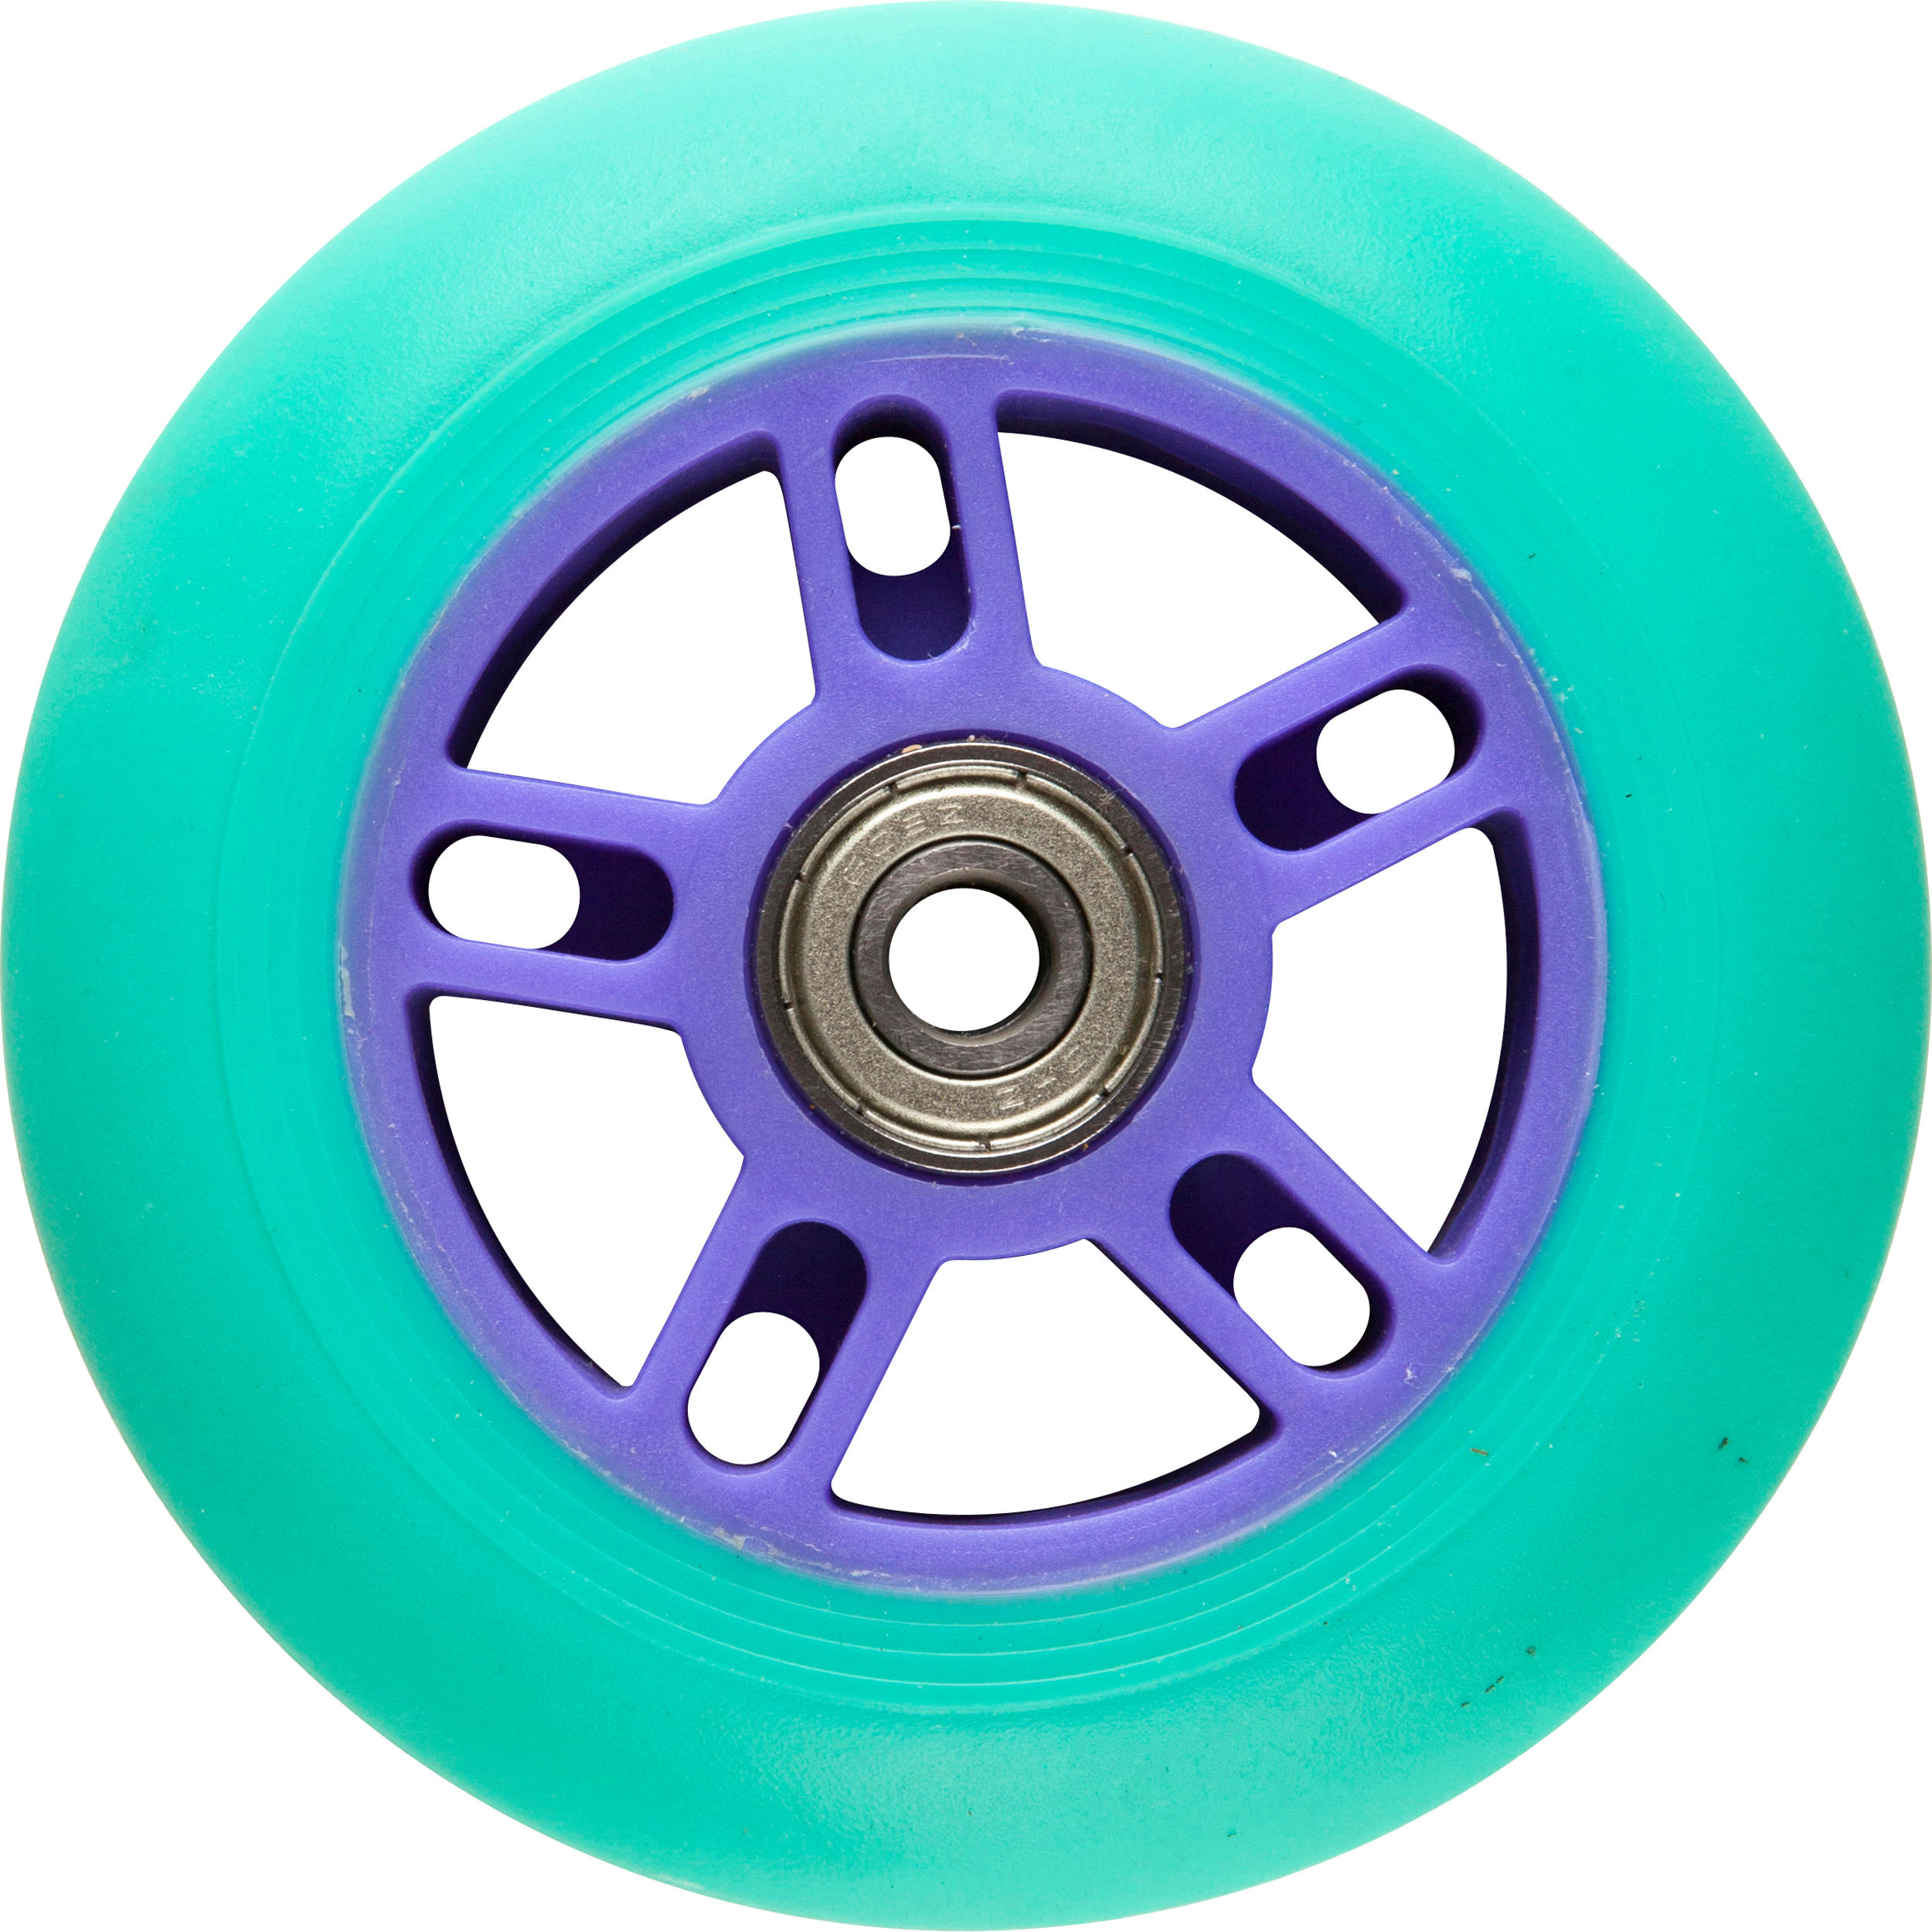 OXELO 1 x 100 mm Scooter Wheel with Bearings - Green